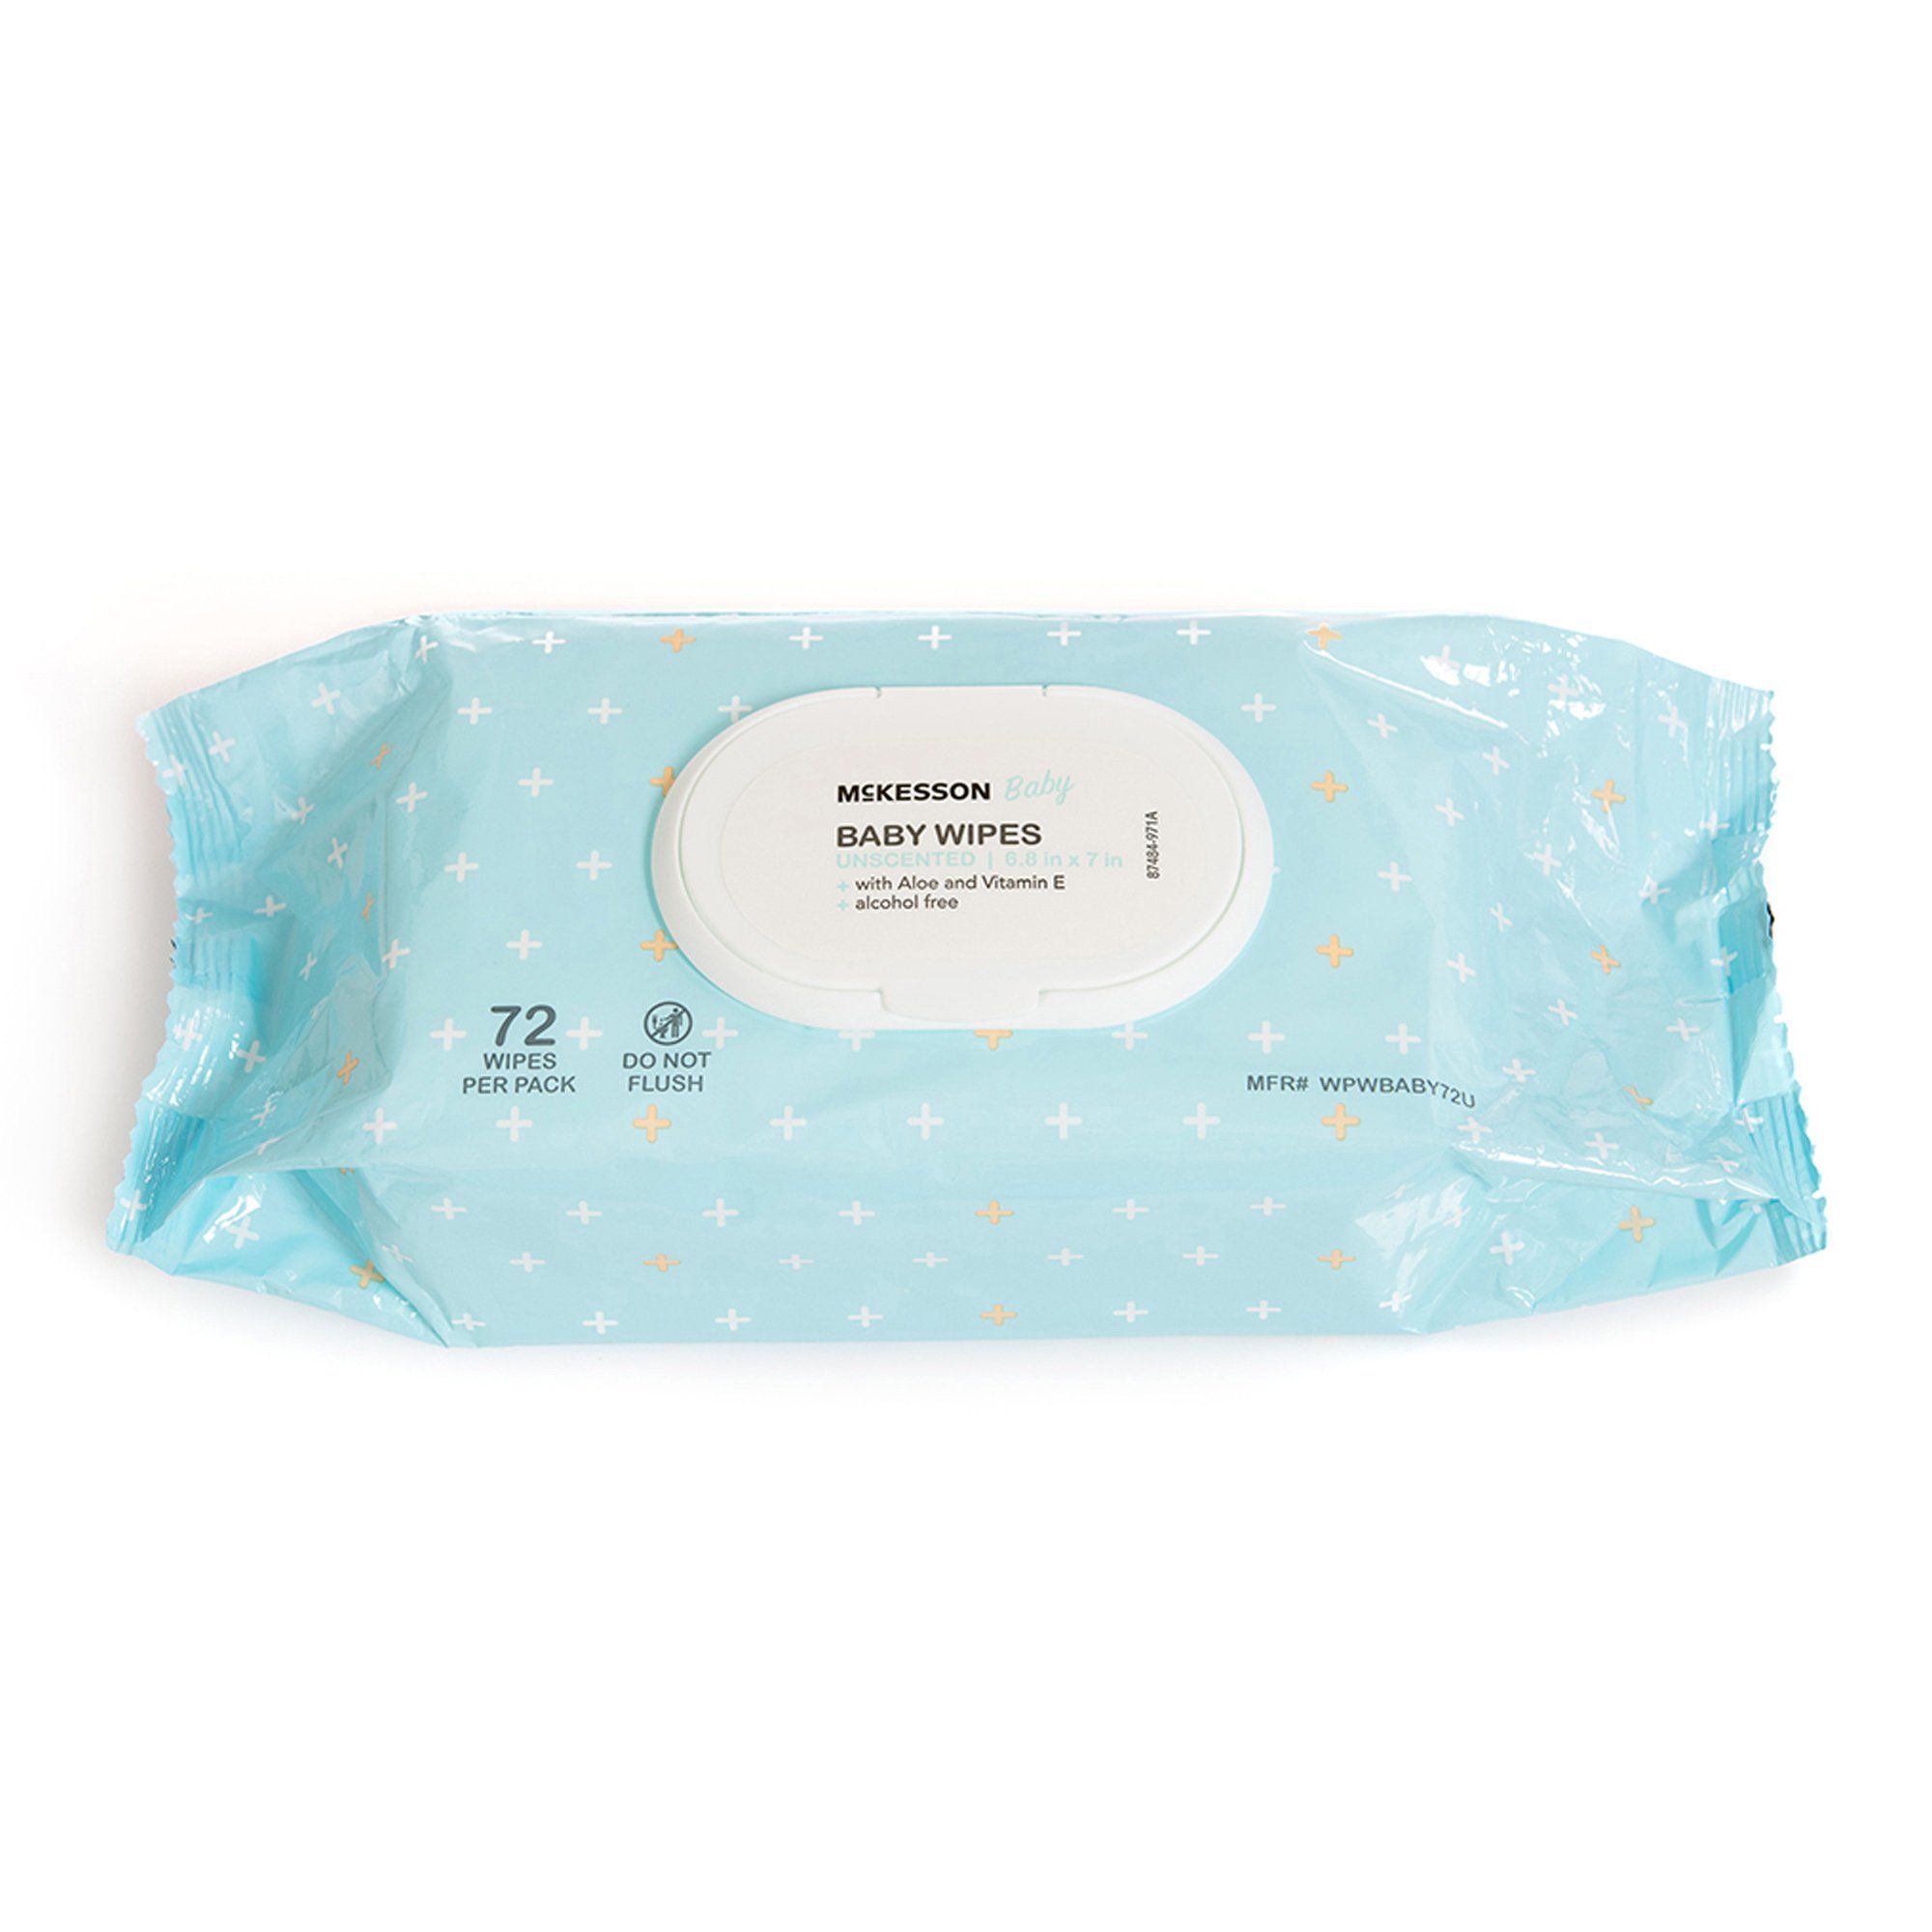 McKesson Baby Wipes with Aloe & Vitamin E, Unscented for Sensitive Skin, 1 pack - 72 ct